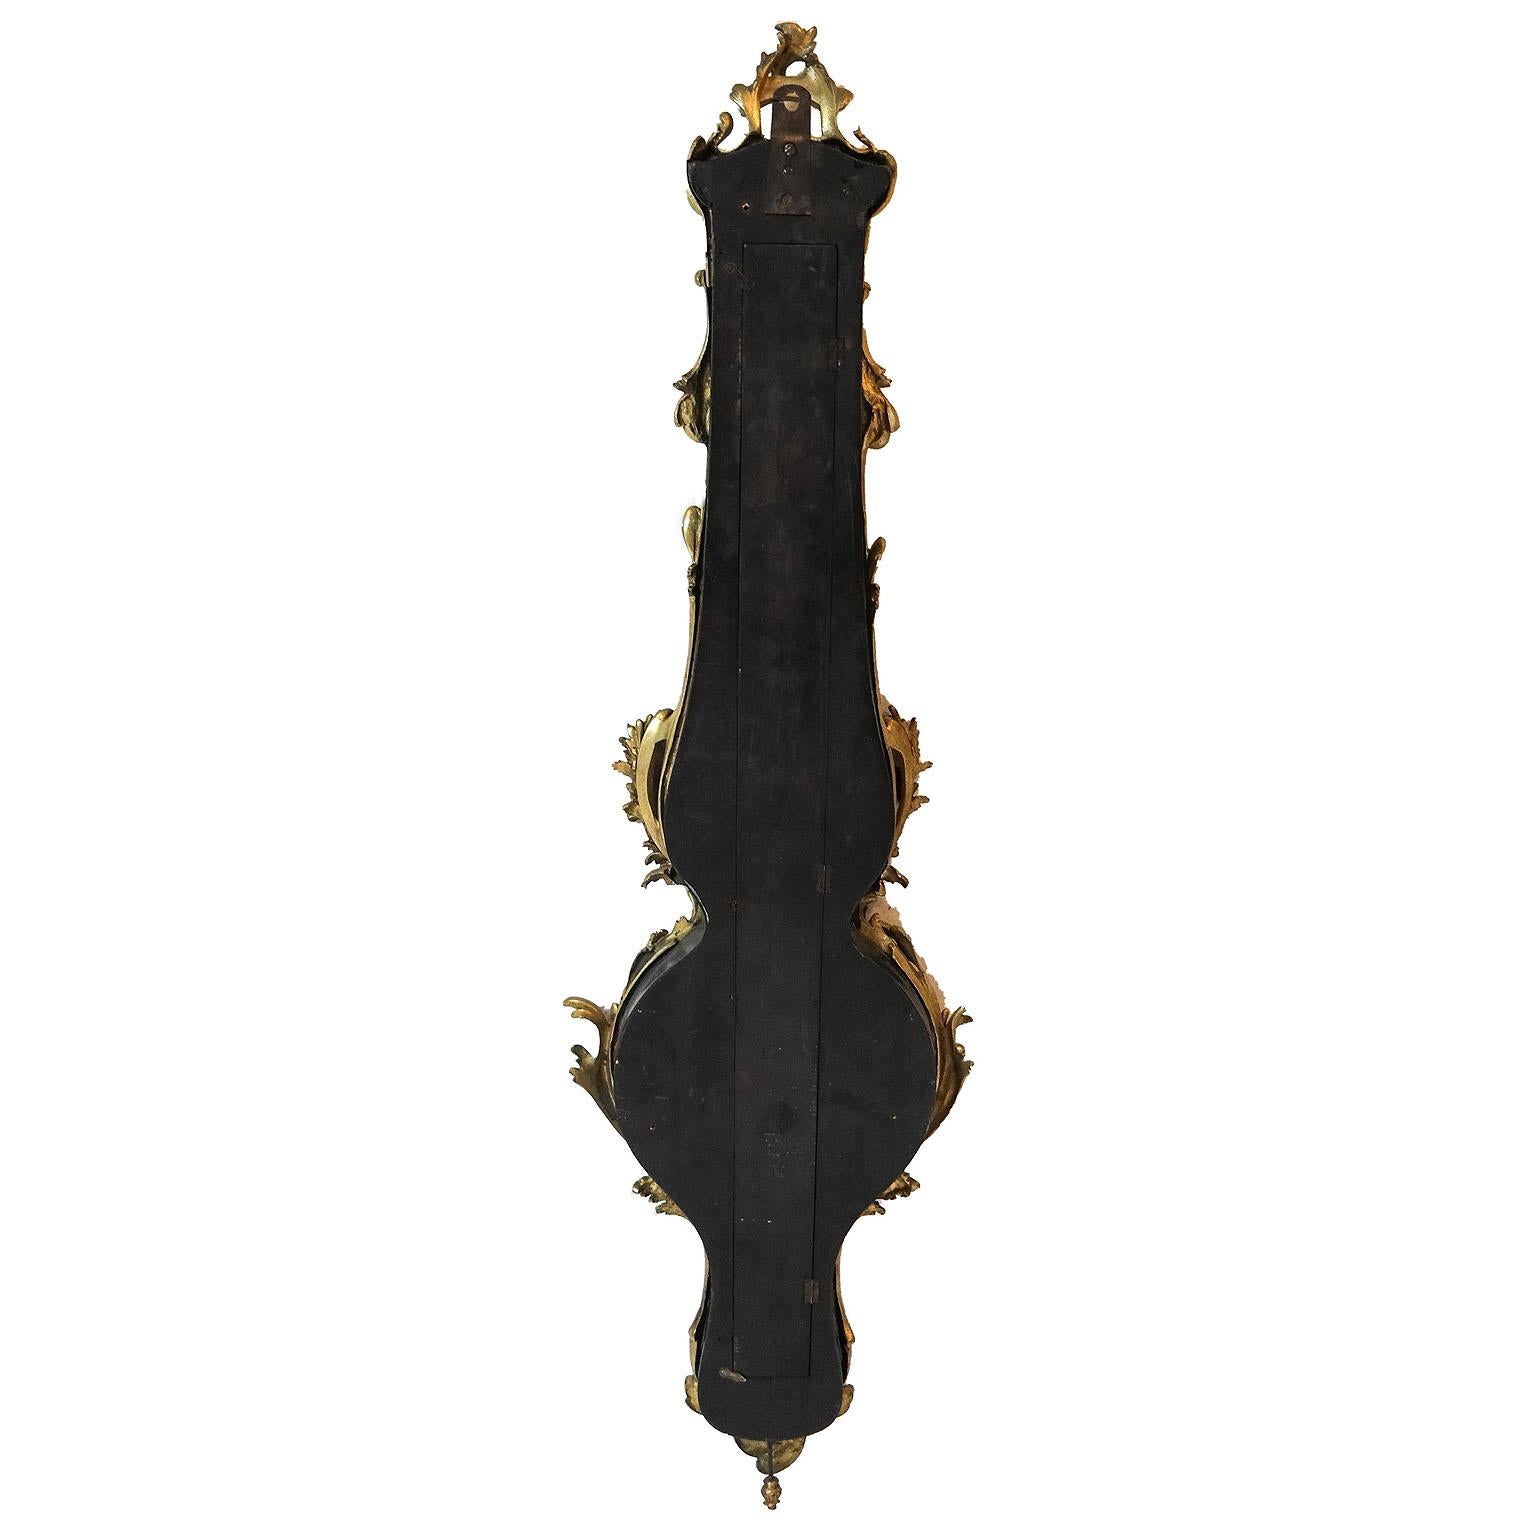 French 19th Century Louis XV Style Gilt-Bronze and Ebonized Wood Wall Barometer For Sale 2